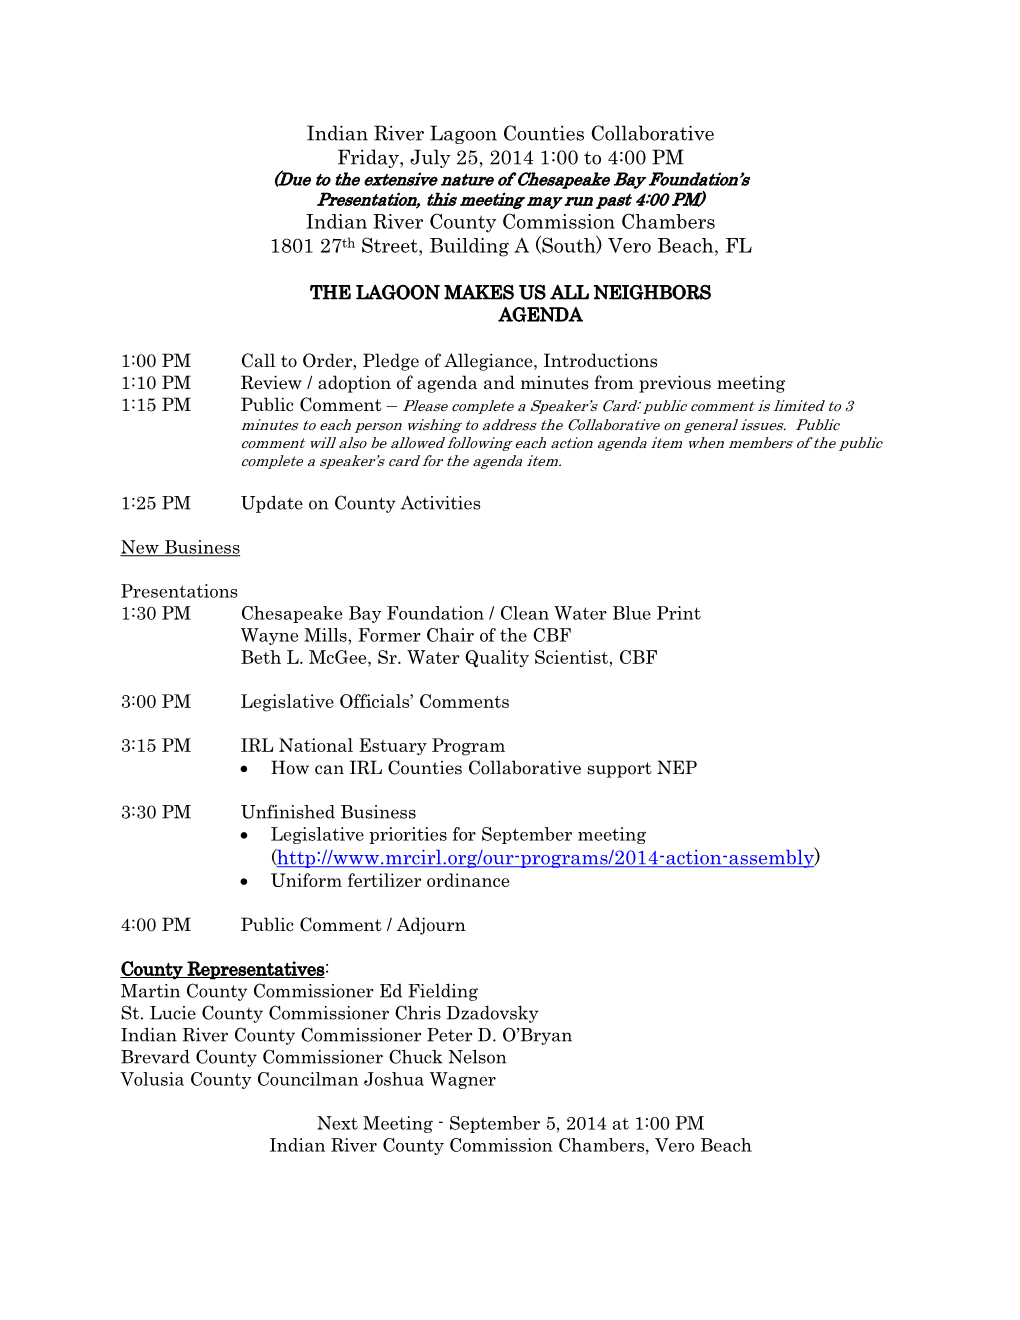 Indian River Lagoon Counties Collaborative Friday, July 25, 2014 1